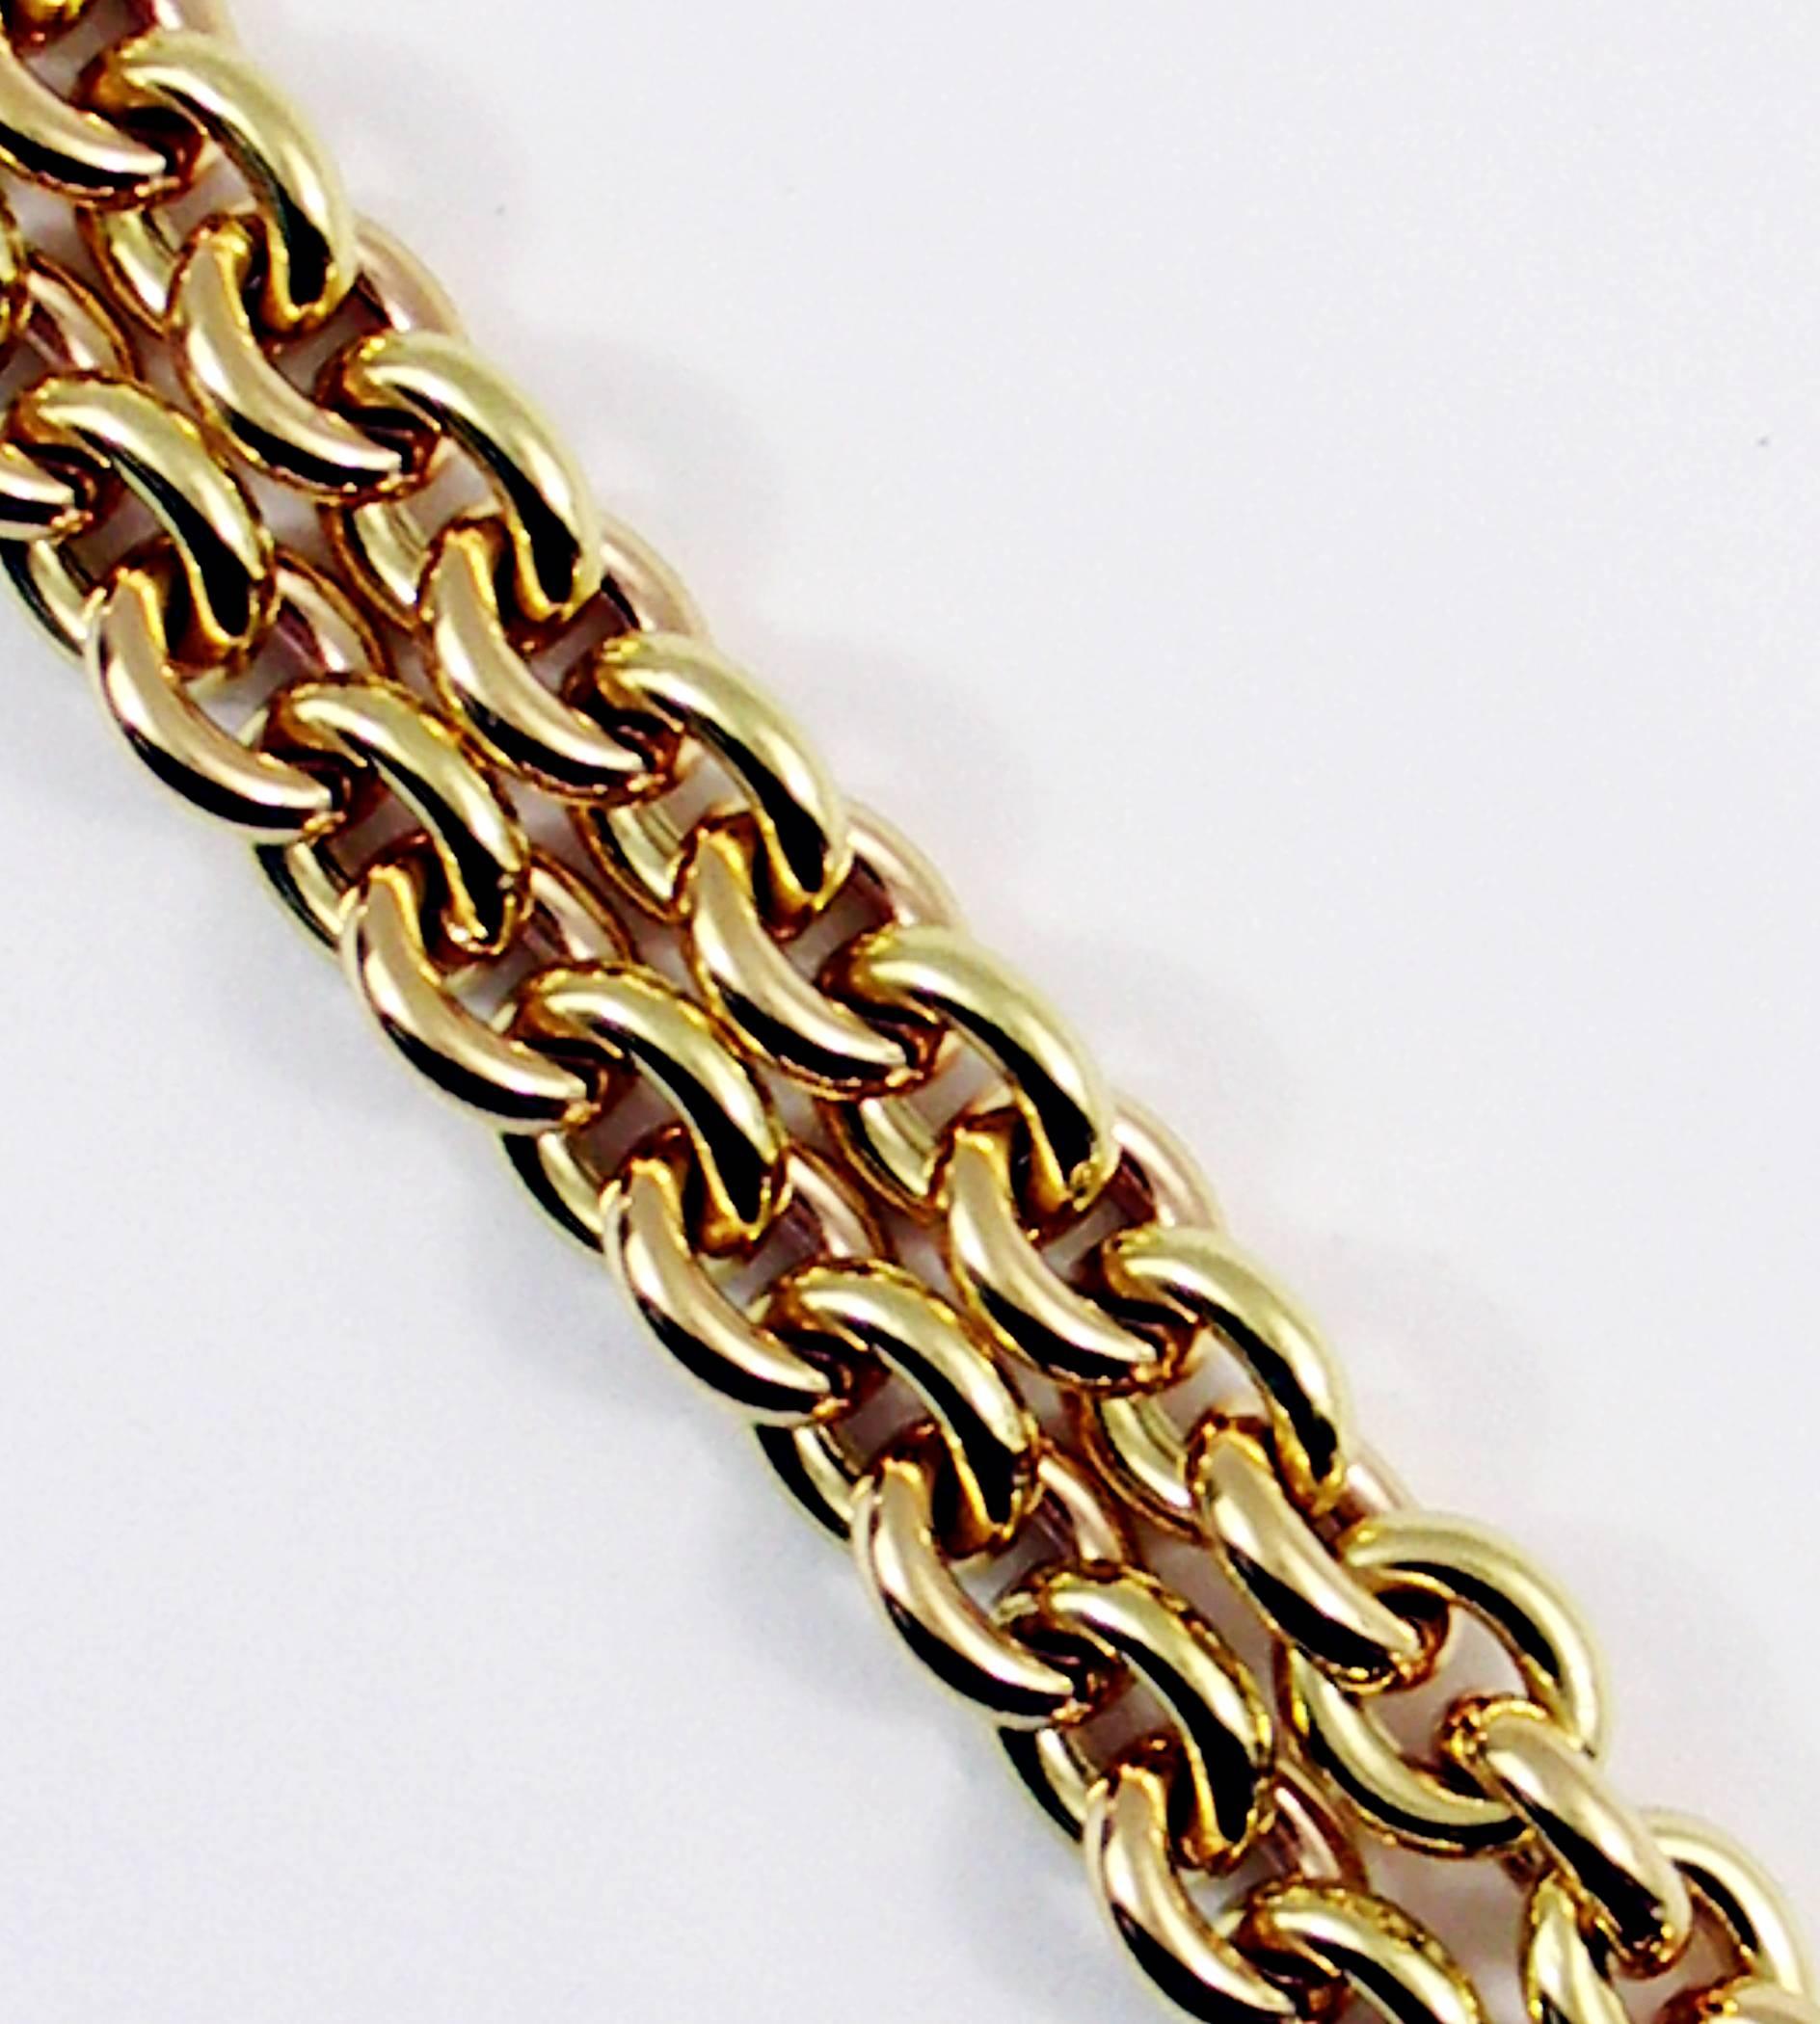 An 18kt yellow gold necklace, comprised of 88 cable links, each measuring 5/8 of an inch by 1/2 an inch, and totaling 30 inches with the clasp. The weight is
121 grams.